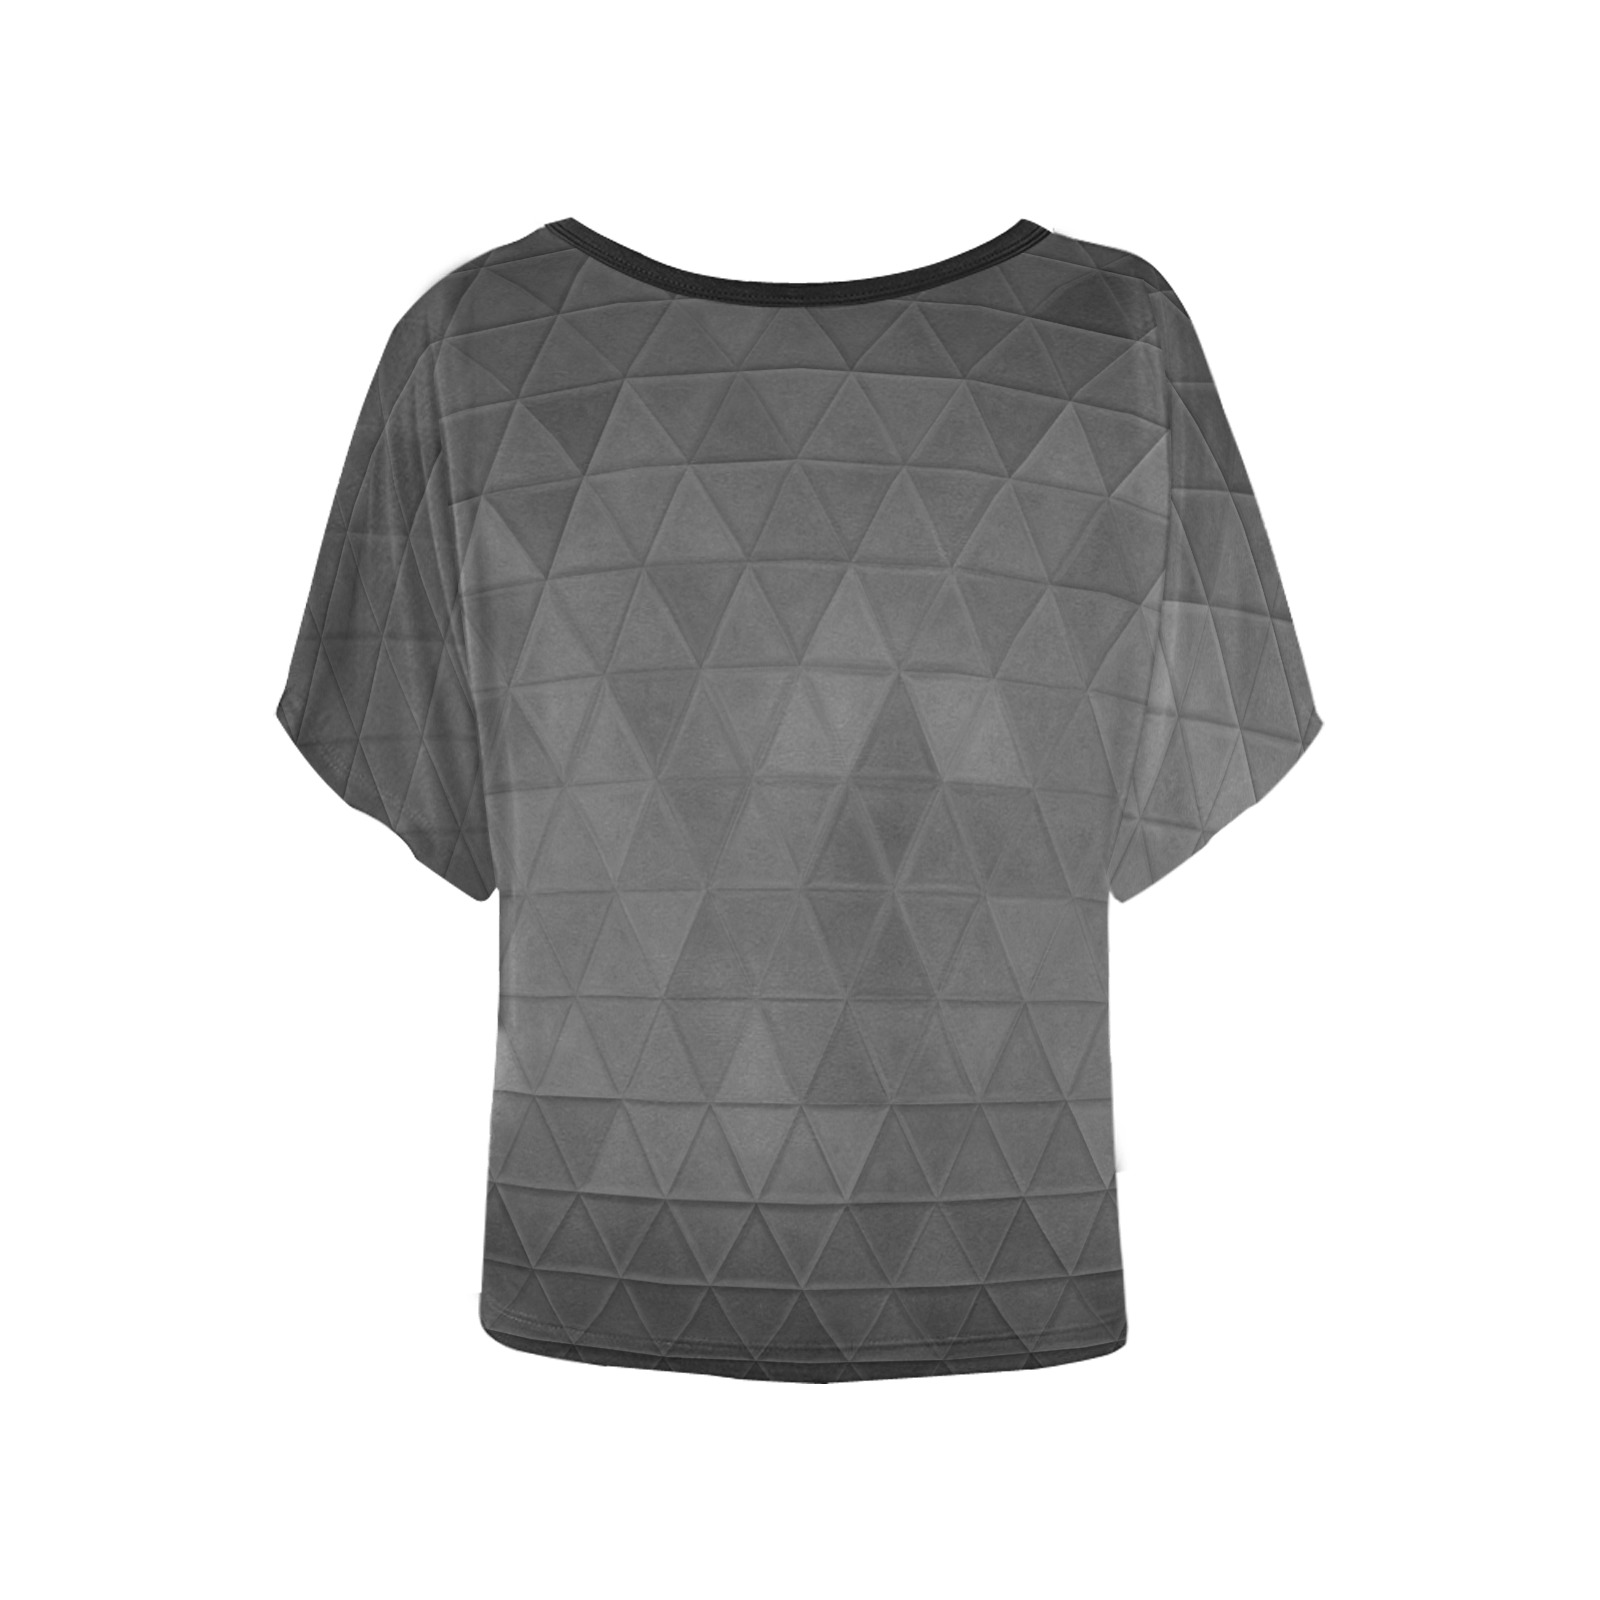 mosaic triangle 15 Women's Batwing-Sleeved Blouse T shirt (Model T44)